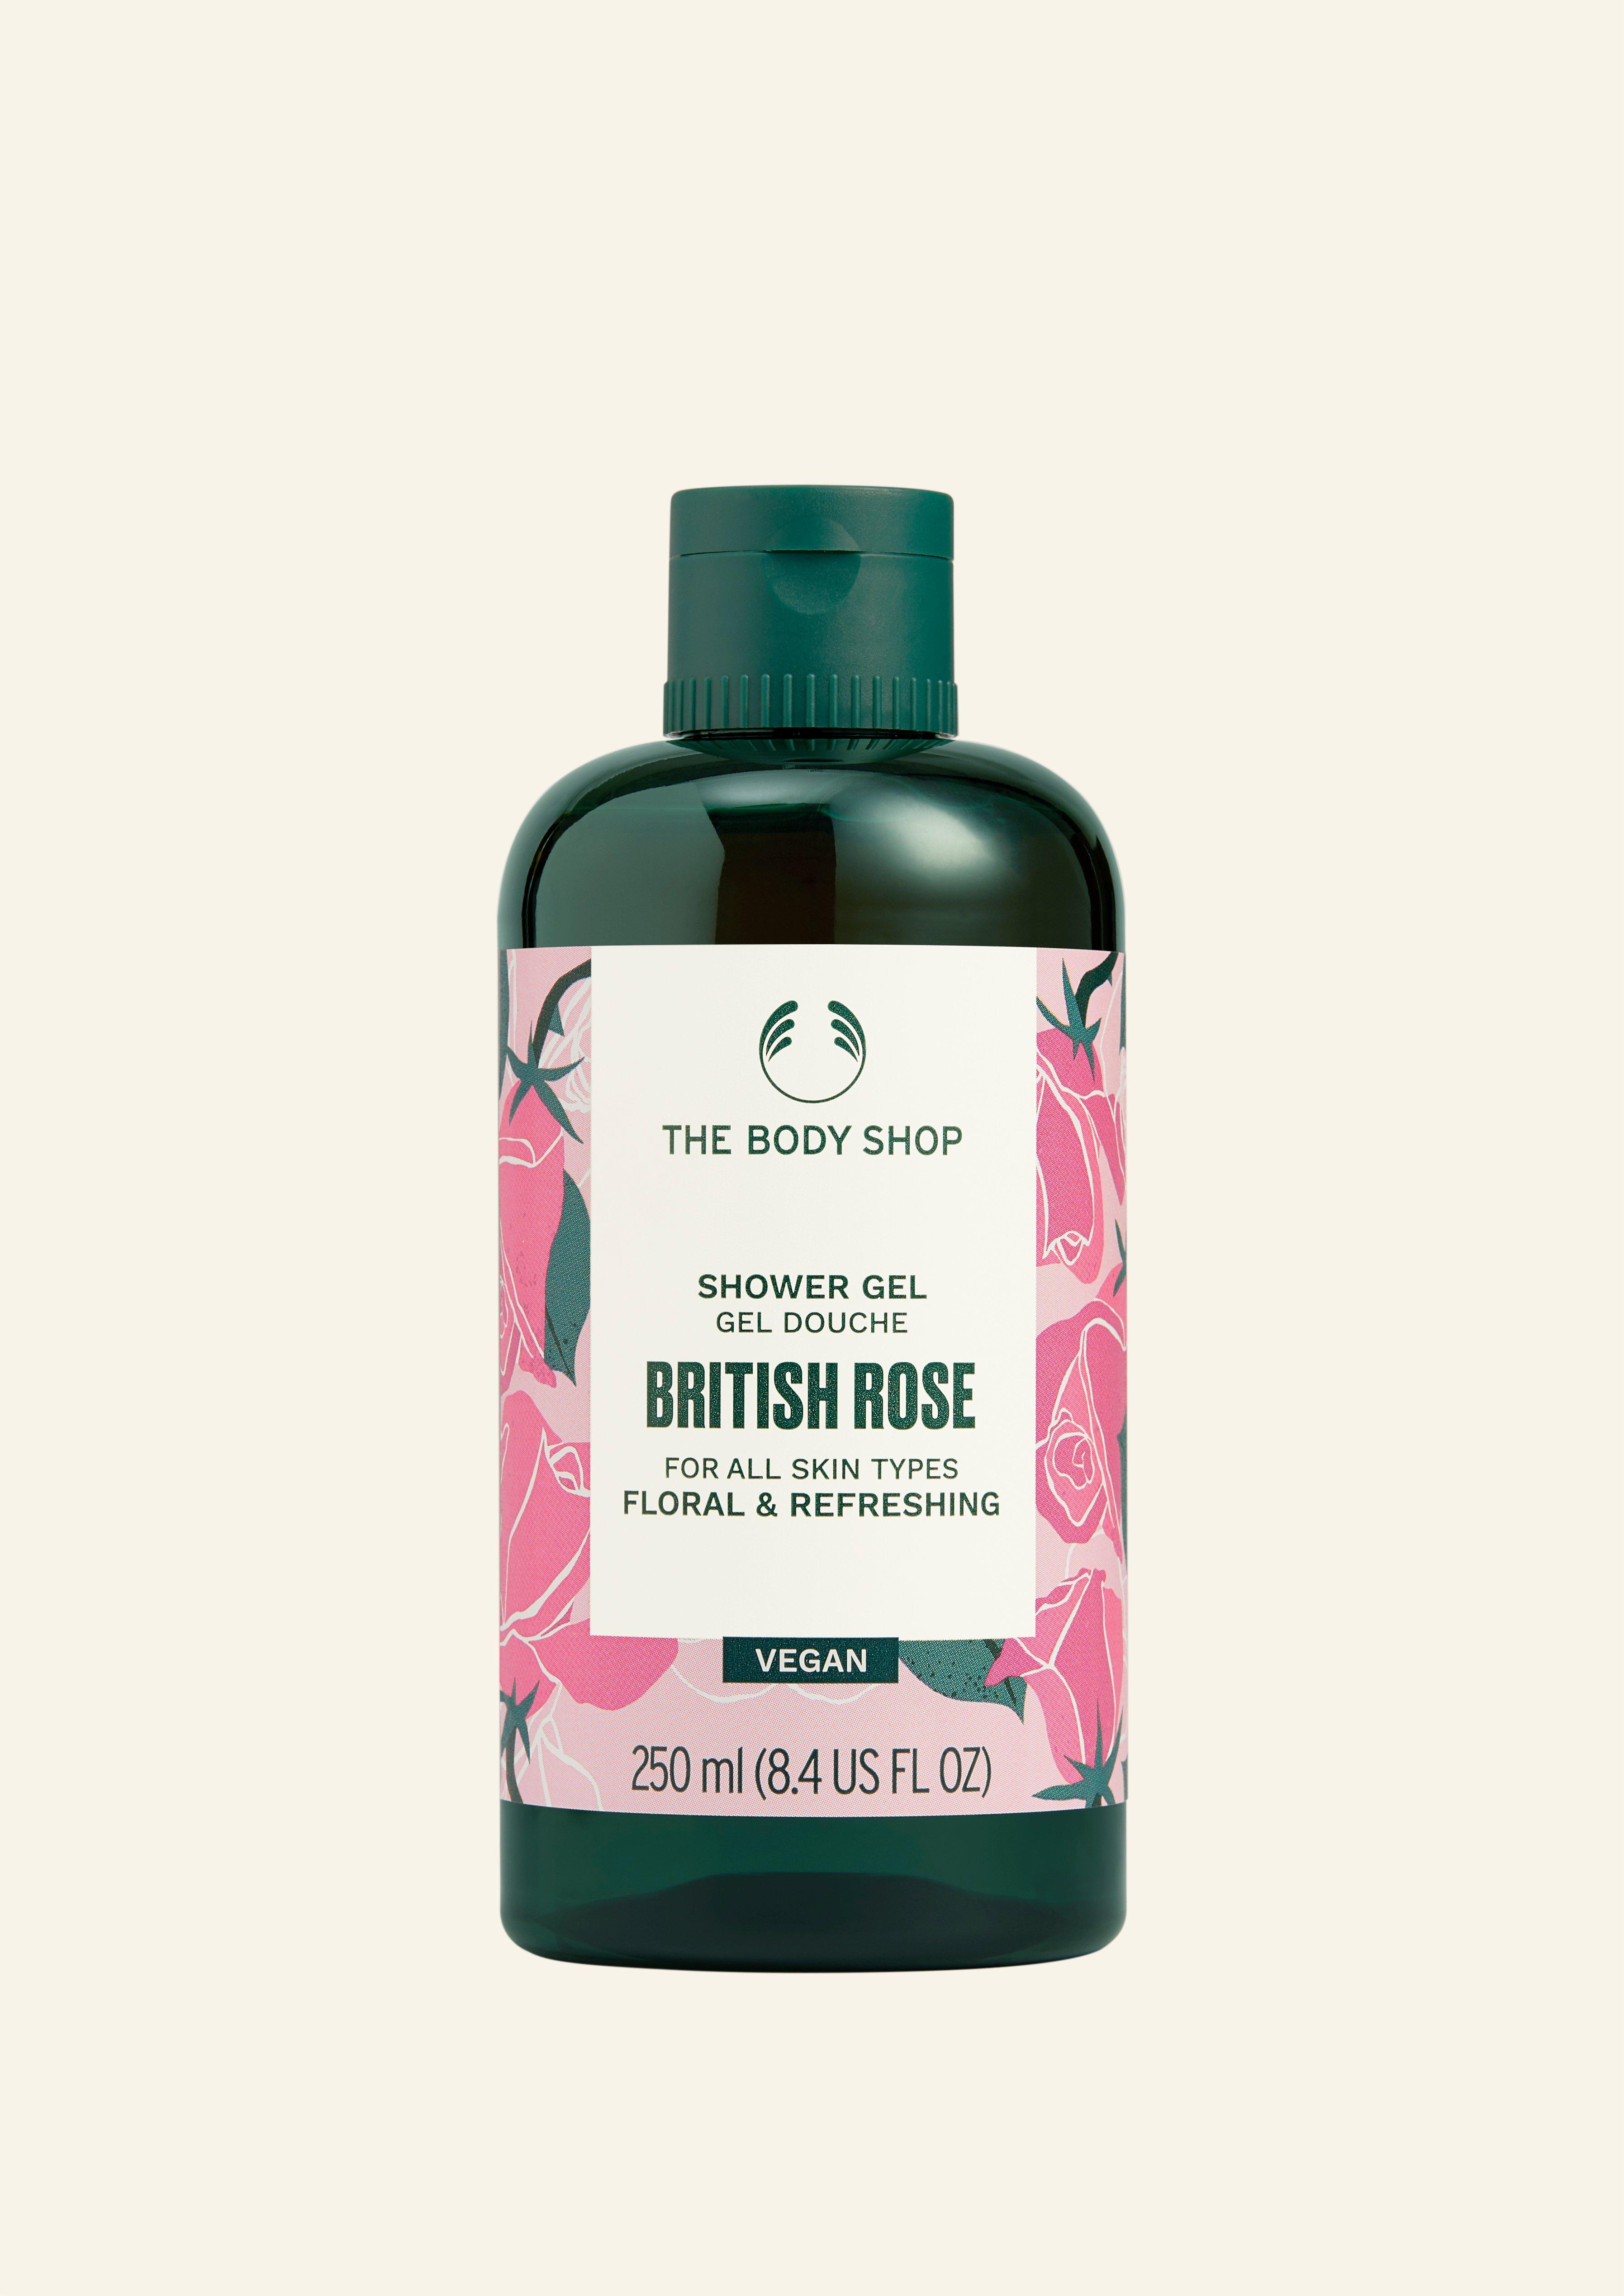 English Rose Body Butter - Bath & Body Gifting from I Love Cosmetics UK